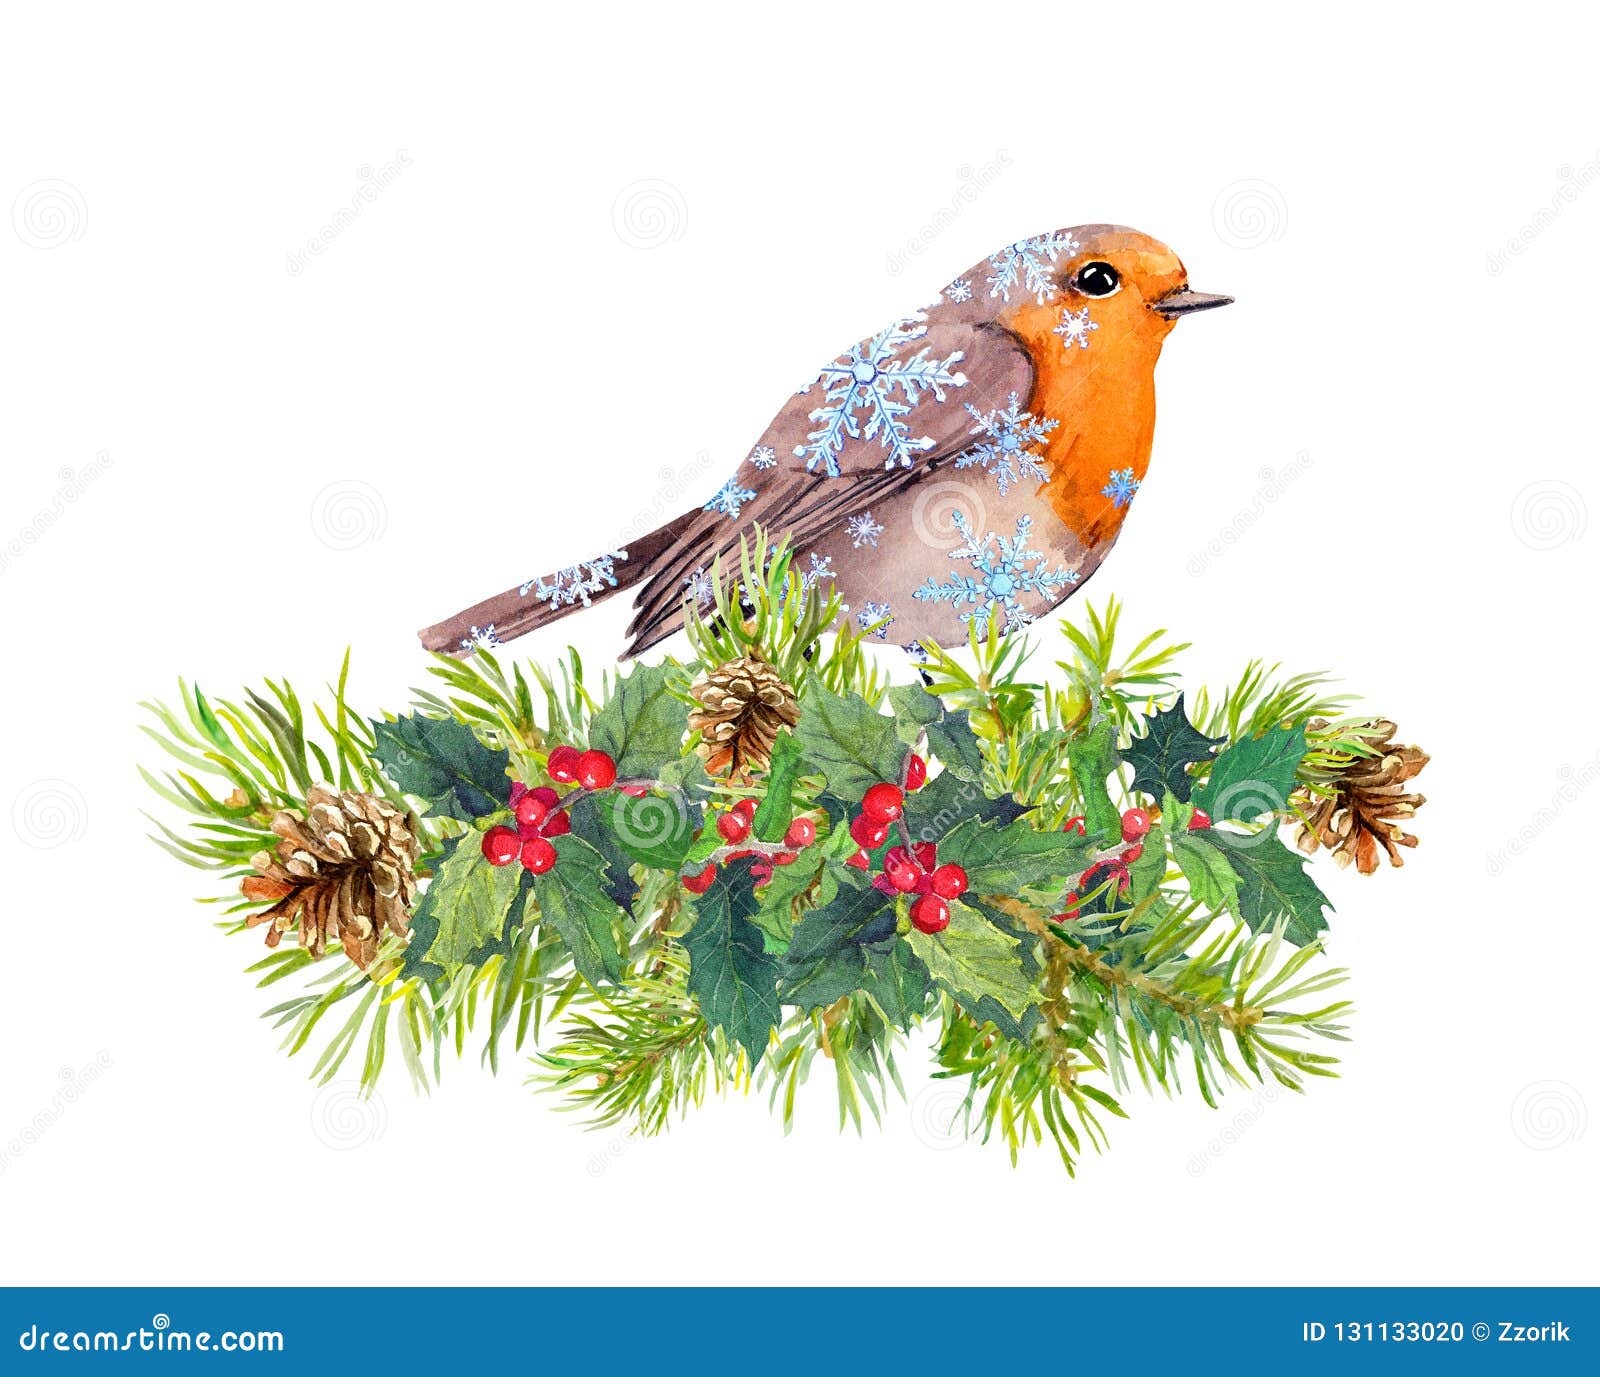 Festive Robins On A Branch Mistletoe Christmas Hanging Decoration Hand Painted 